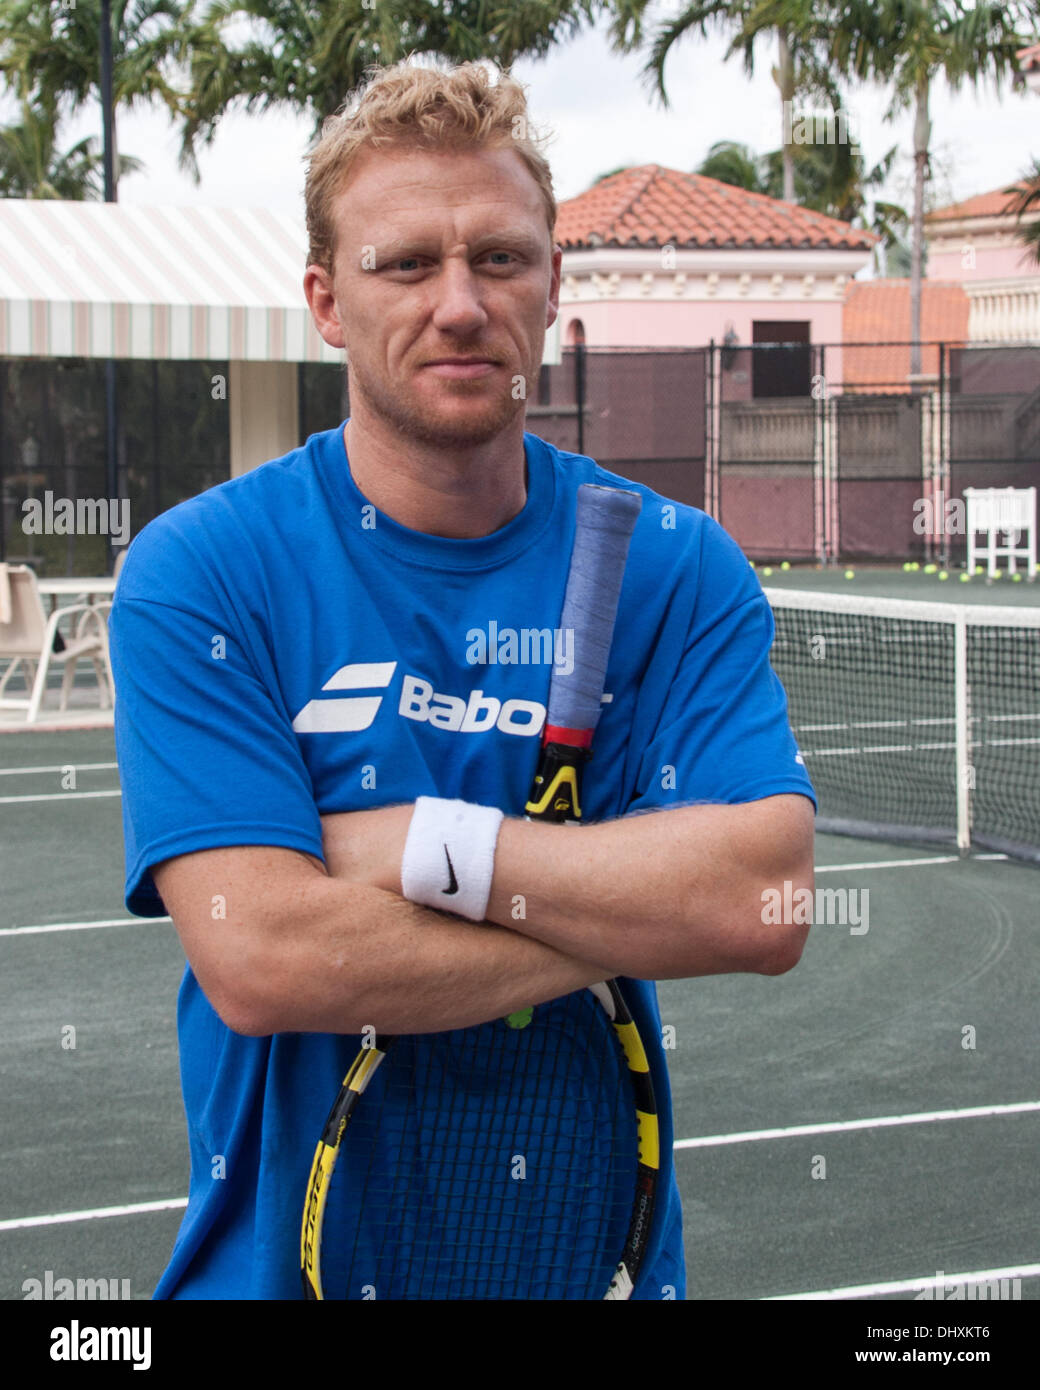 Boca Raton, Florida, USA.  15th Nov, 2013. KEVIN McKIDD, film and TV actor [Grey's Anatomy], during a practice session for the 2013 Chris Evert/Raymond James Pro-Celebrity Tennis Classic at the Boca Raton Resort & Club, Boca Raton, Florida. Since 1989, Chris Evert Charities has raised more than $20.6 million for Florida's at-risk children. Credit:  Arnold Drapkin/ZUMAPRESS.com/Alamy Live News Stock Photo